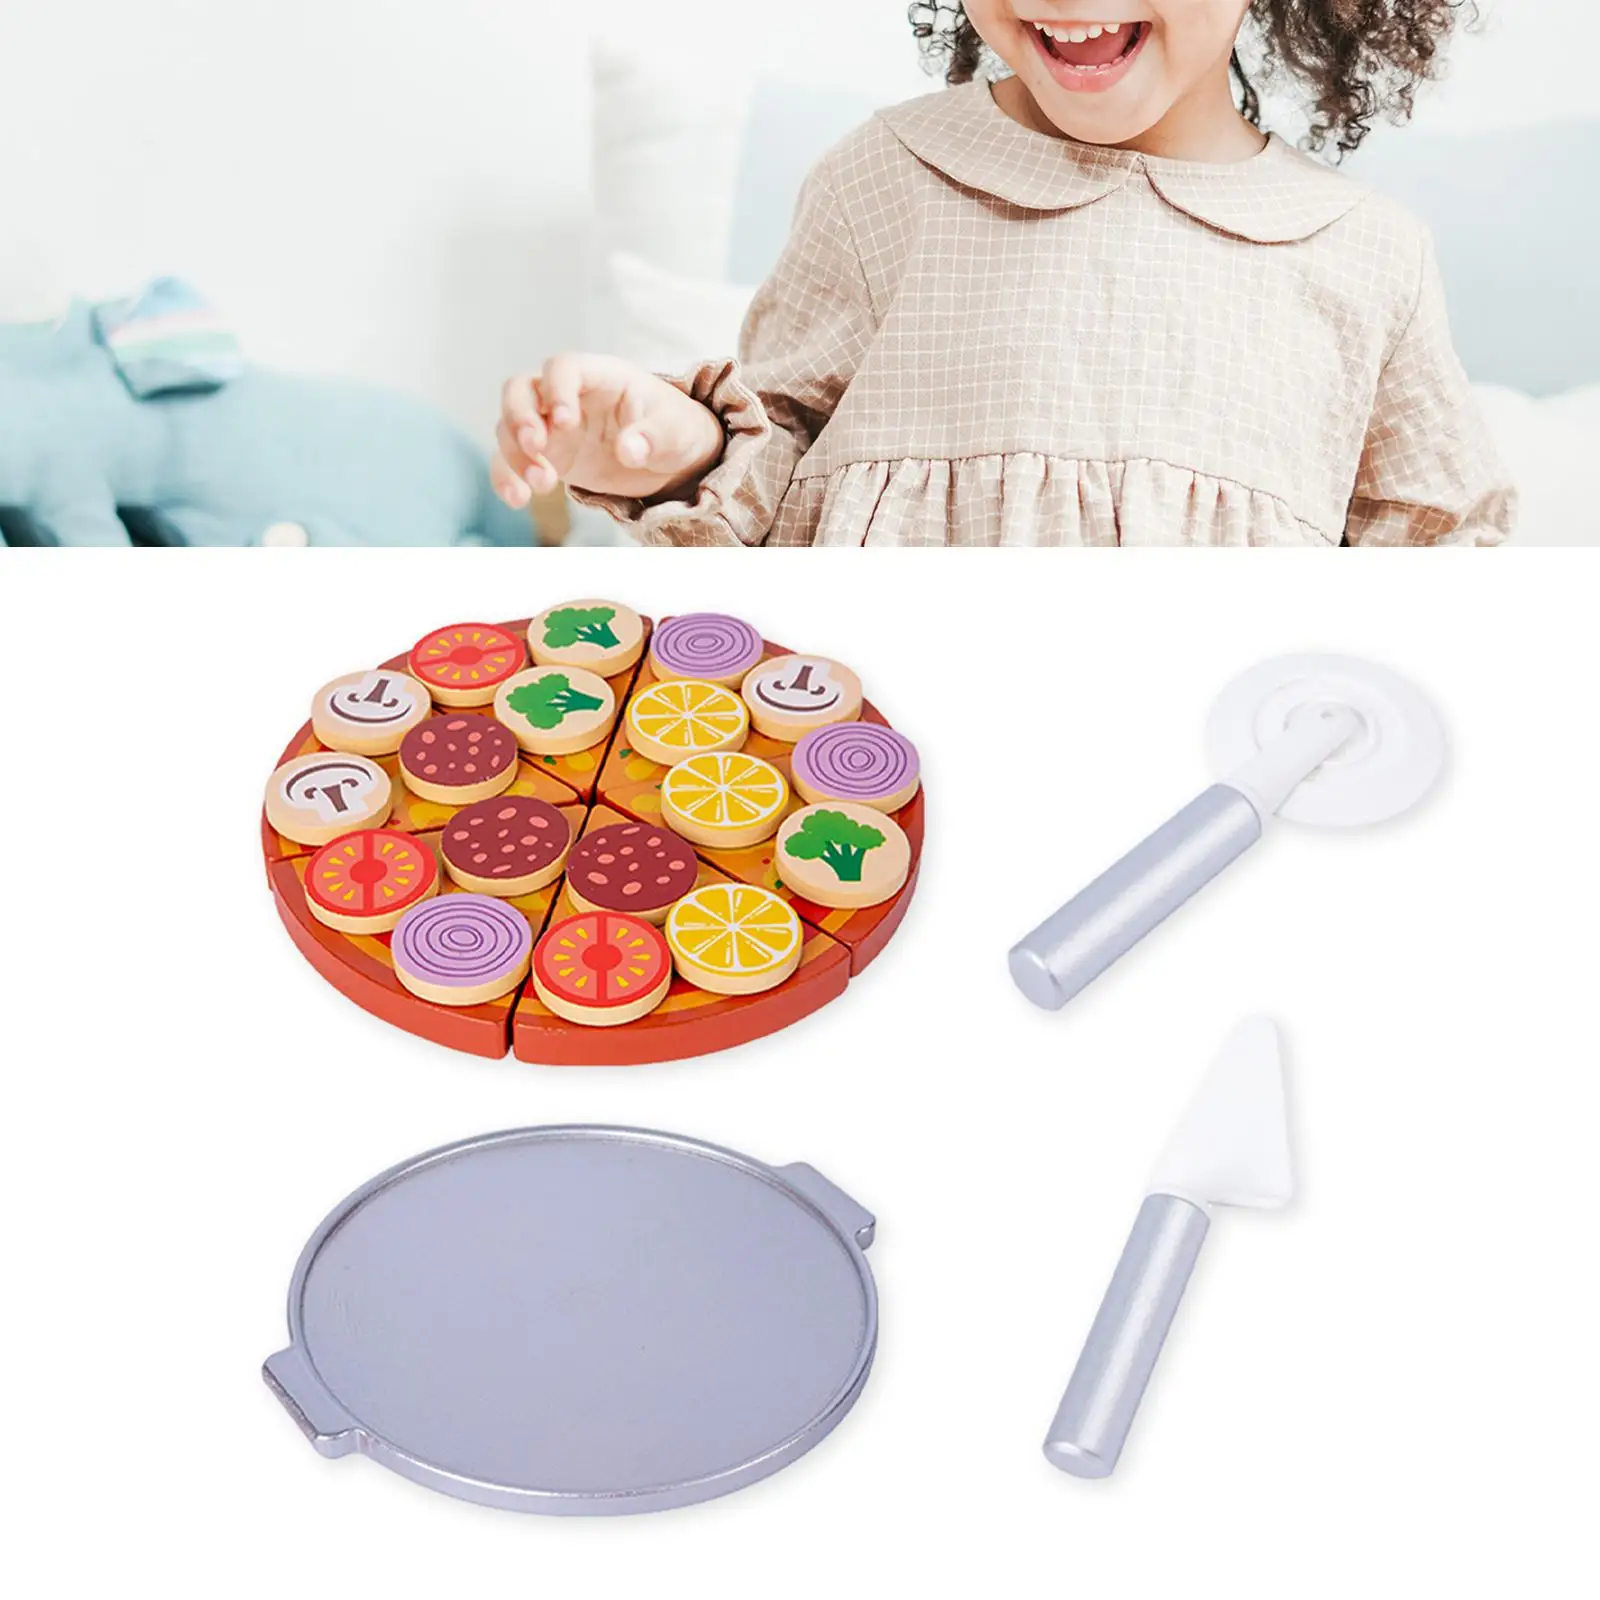 Cutting Play Food Toy for Kids Pretend Food for Toddlers for Christmas Ages 3+ Thanksgiving Present Children Birthday Girls Boys